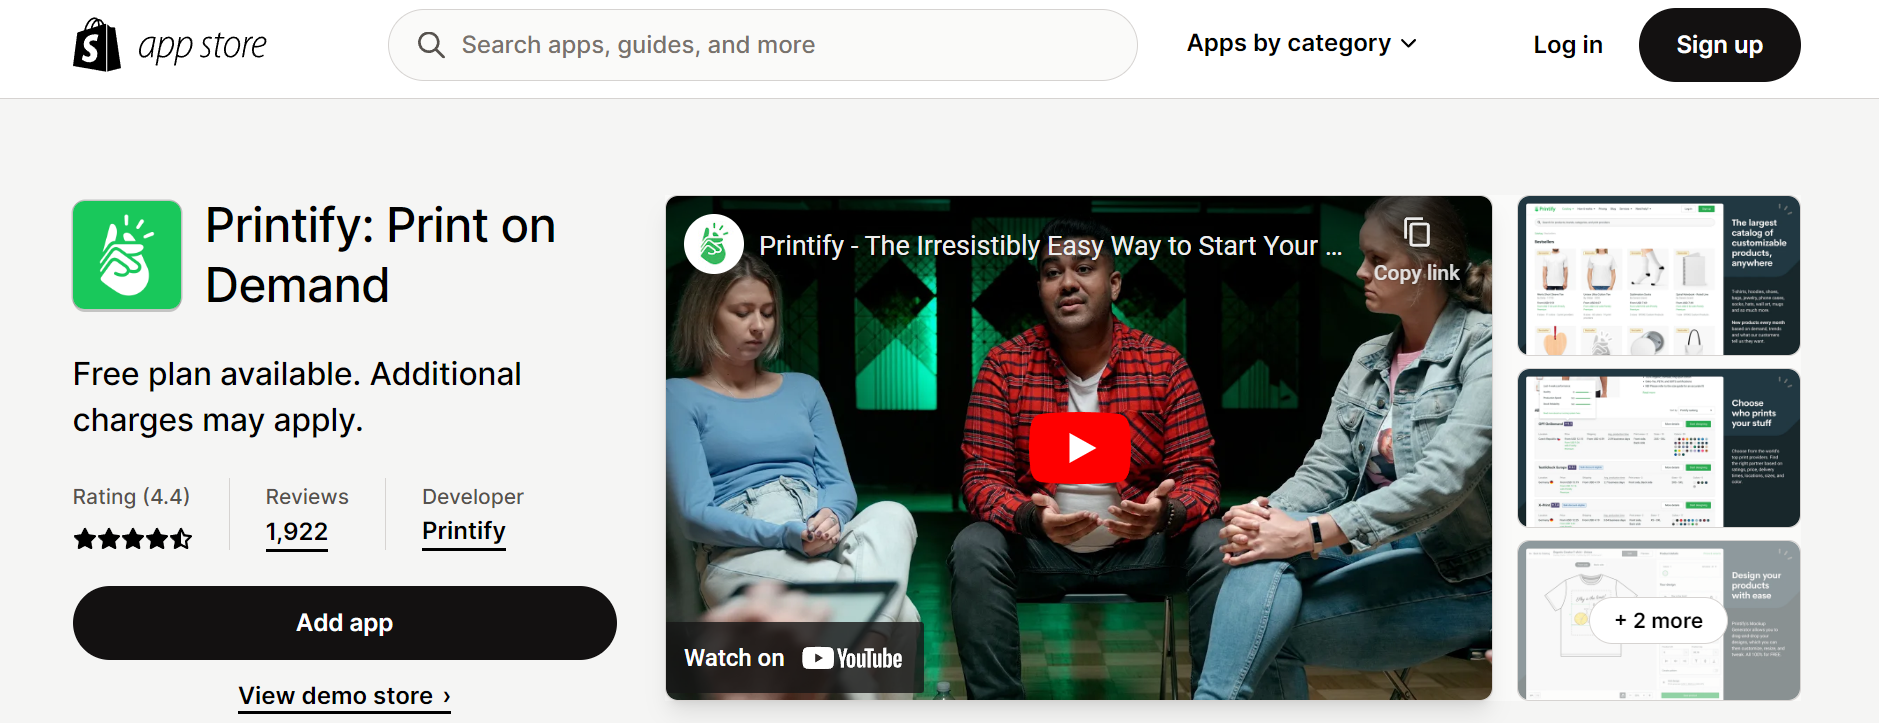 Printify’s app page within the Shopify App Store helps direct new customers to the site